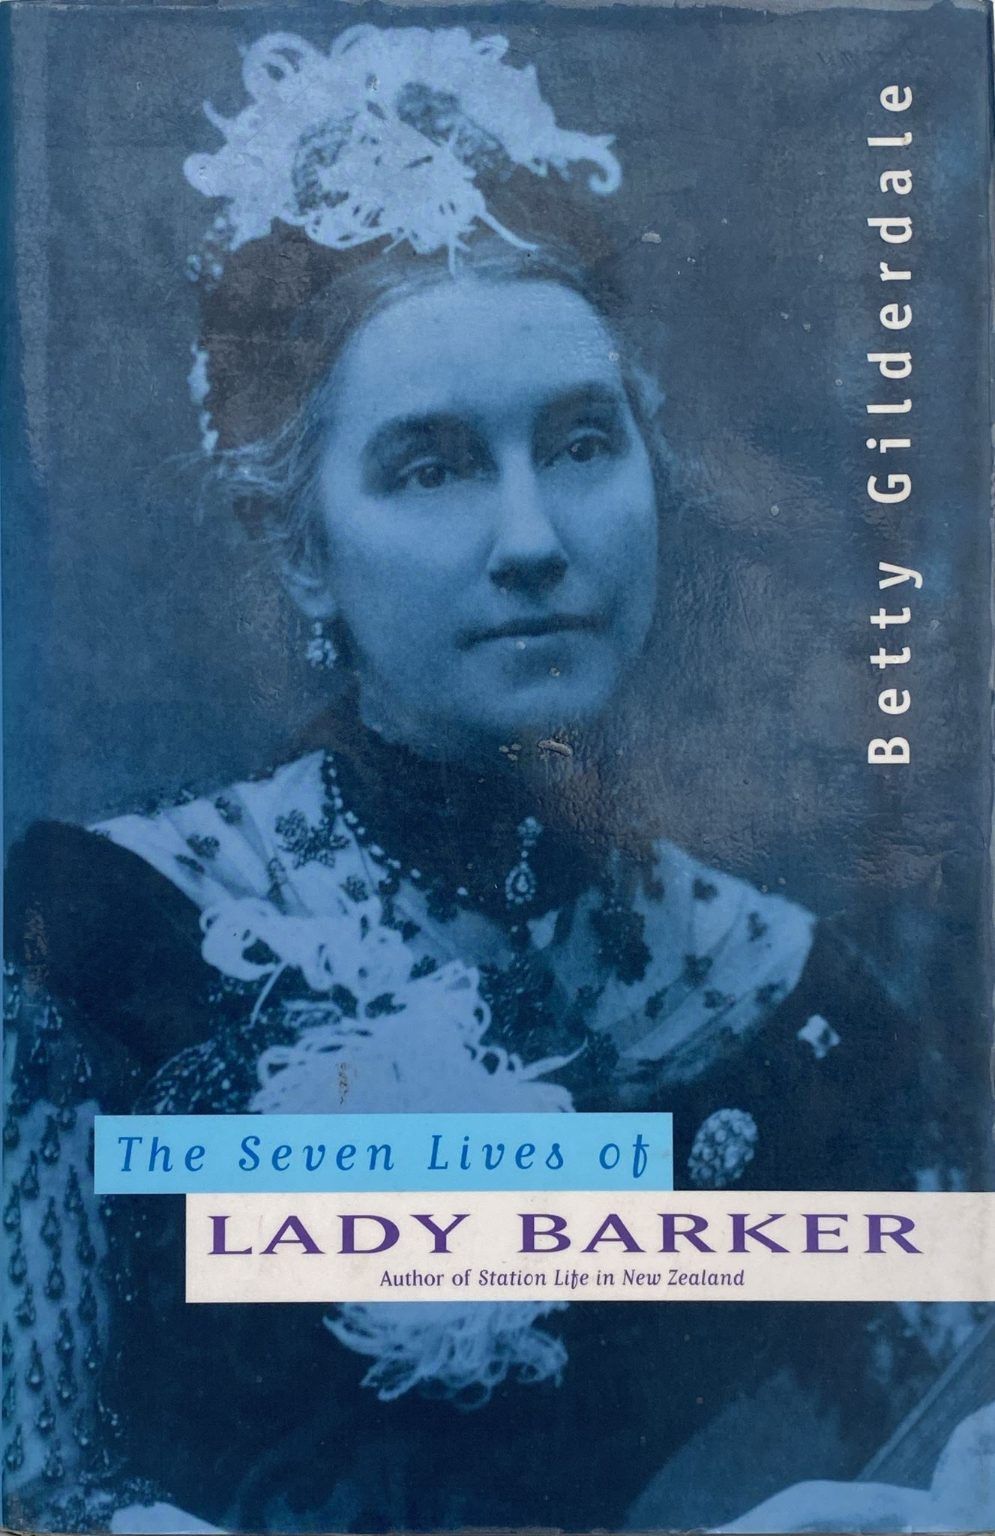 THE SEVEN LIVES OF LADY BARKER